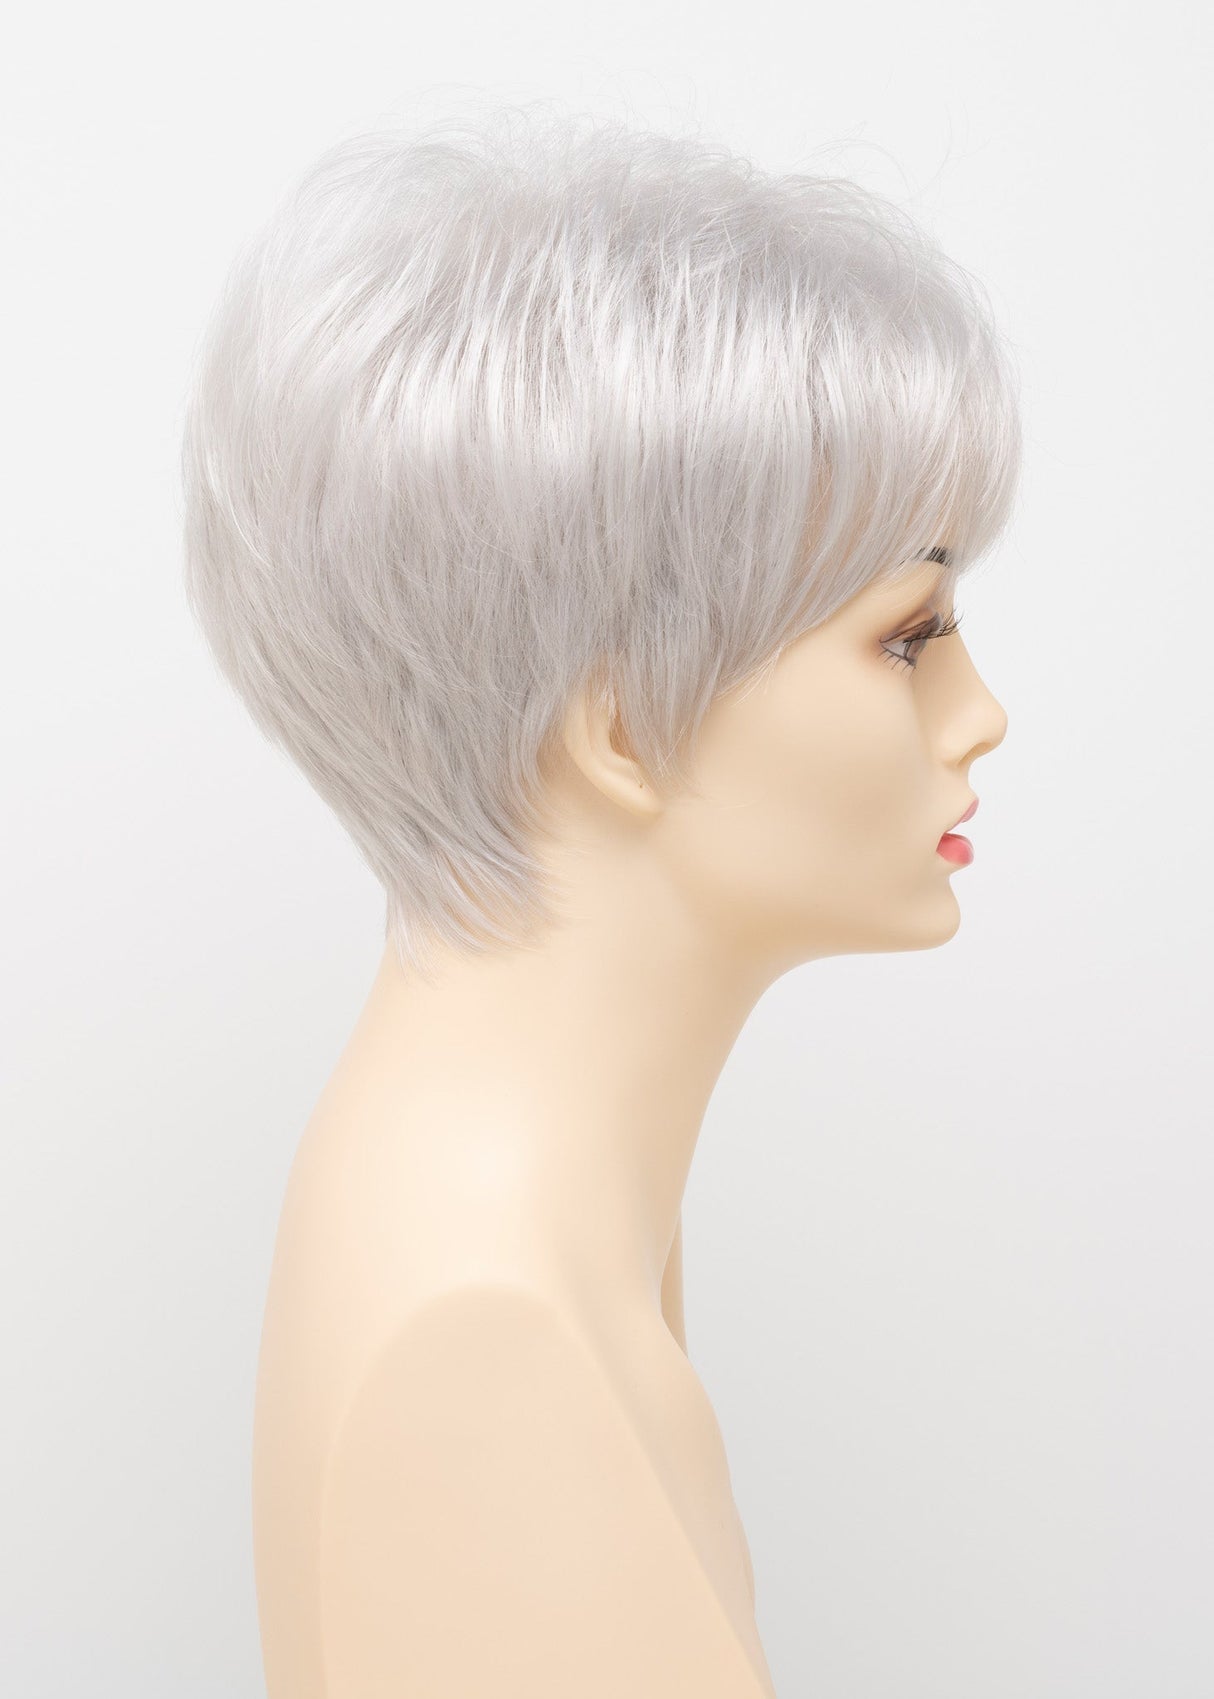 Tiffany (Large Cap) - Synthetic Wig Collection by Envy